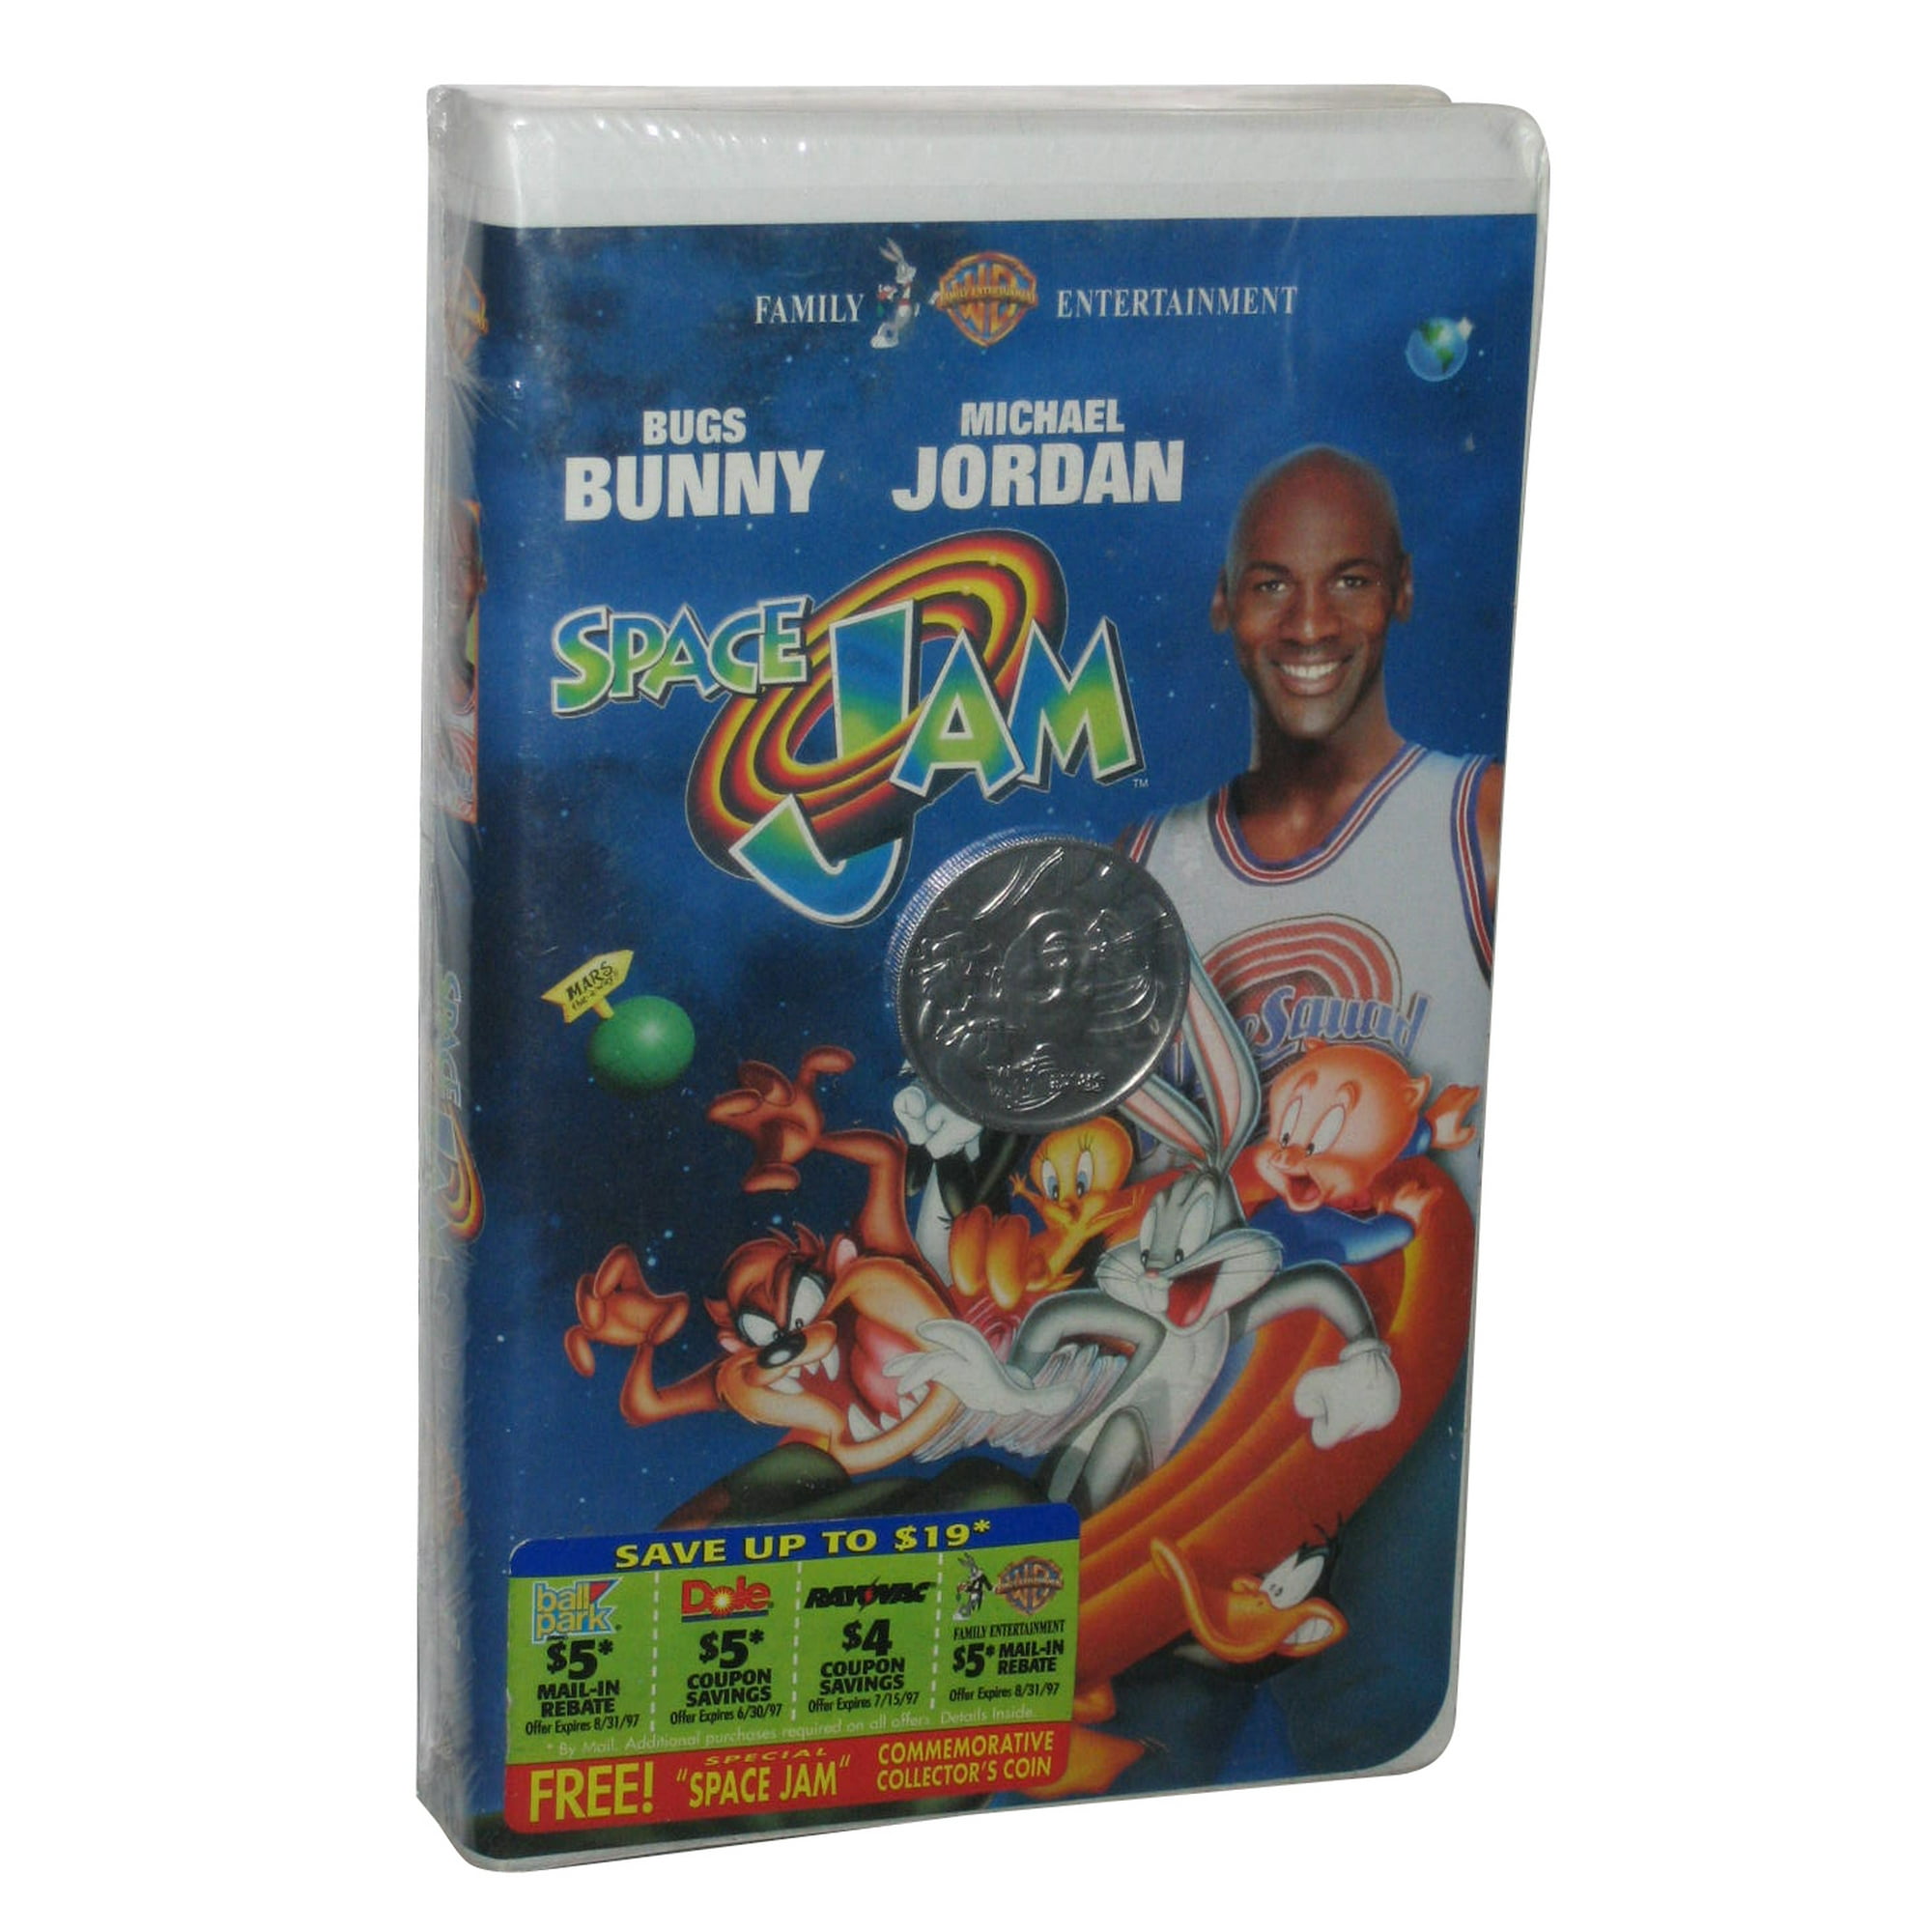 Space Jam (1996) on VHS with Commemorative Coin